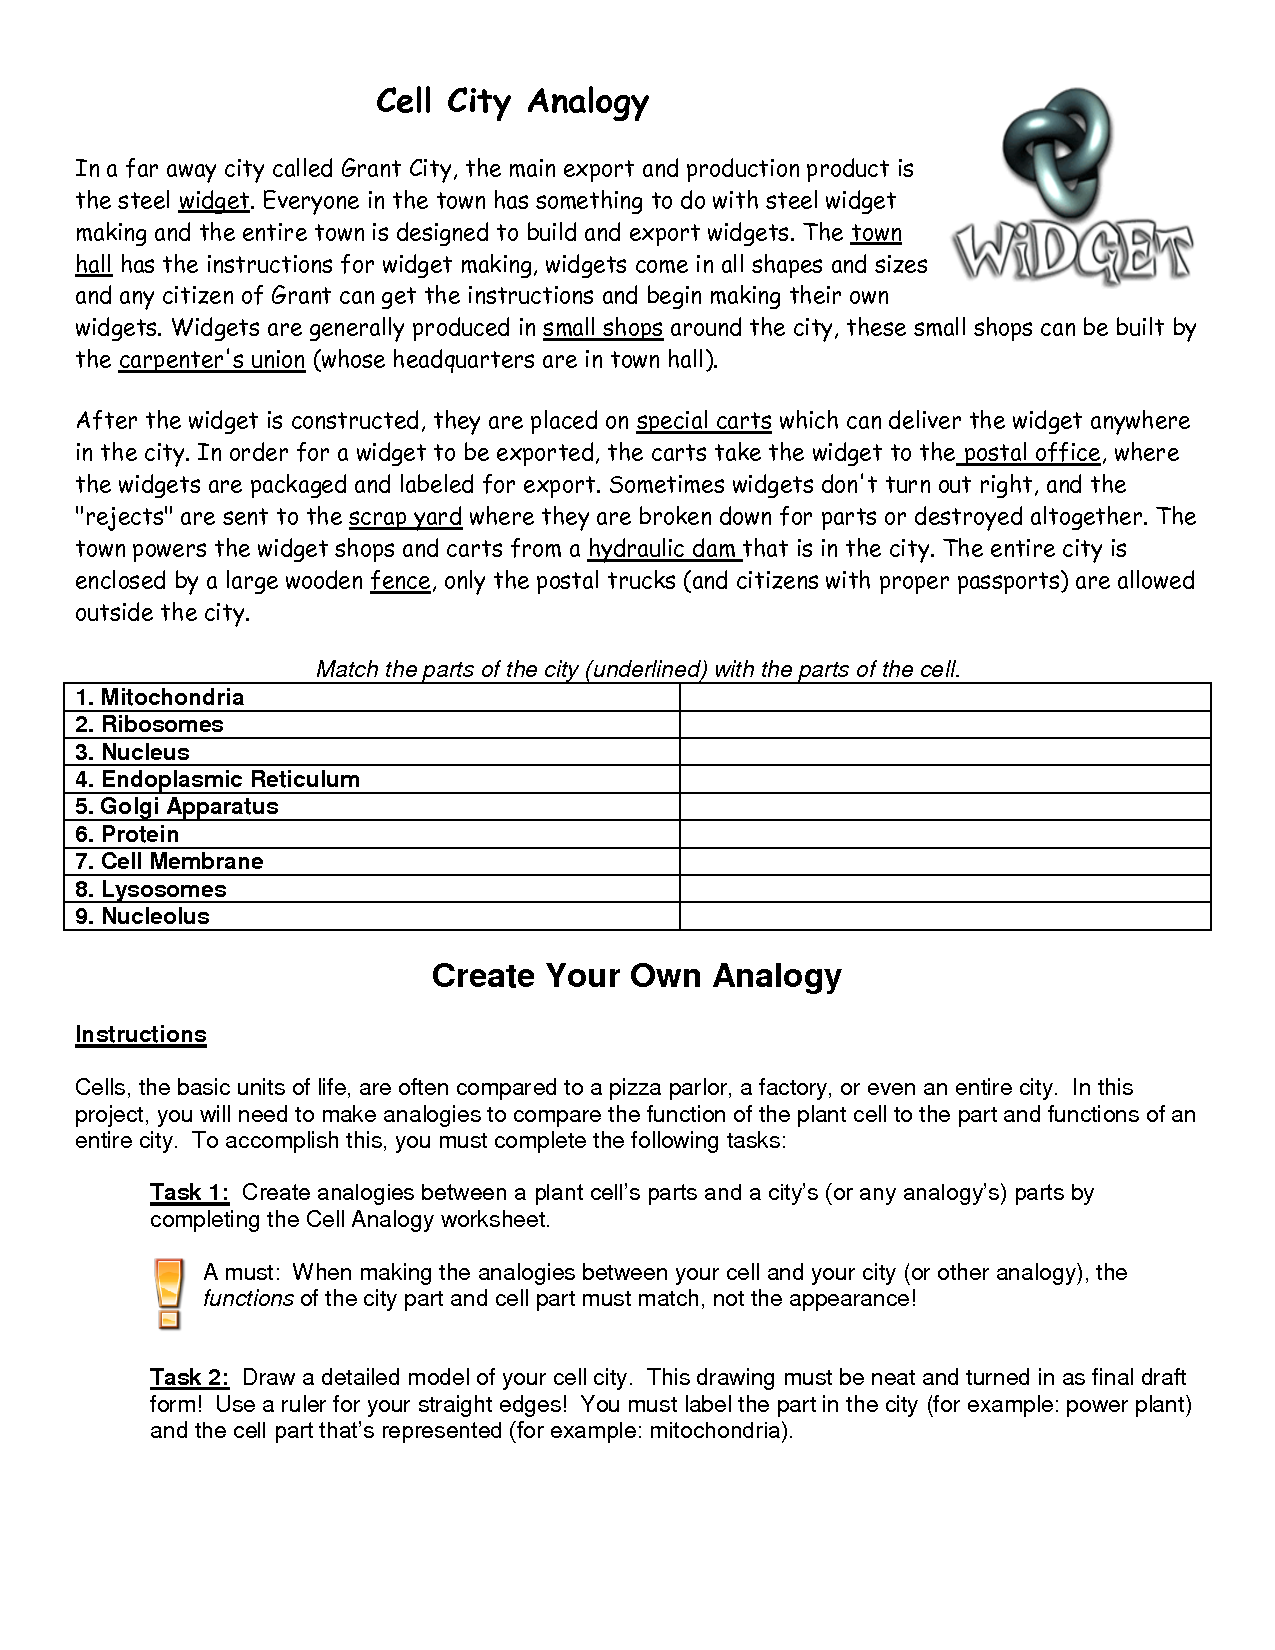 14-best-images-of-cell-city-worksheet-cell-city-analogy-worksheet-answers-cell-city-worksheet